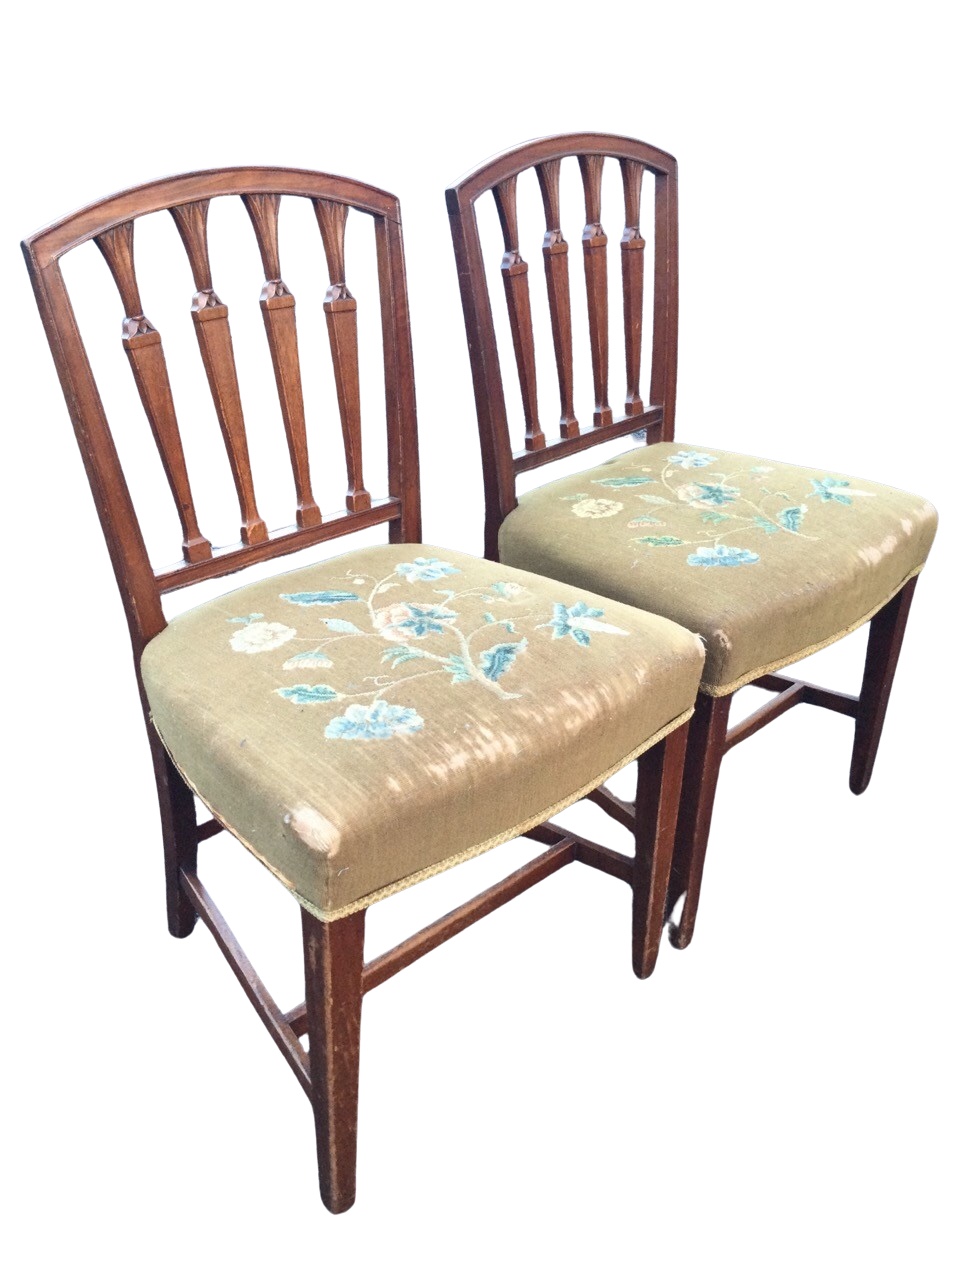 A pair of C19th mahogany Sheraton style chairs with arched backs framing leaf carved tapering